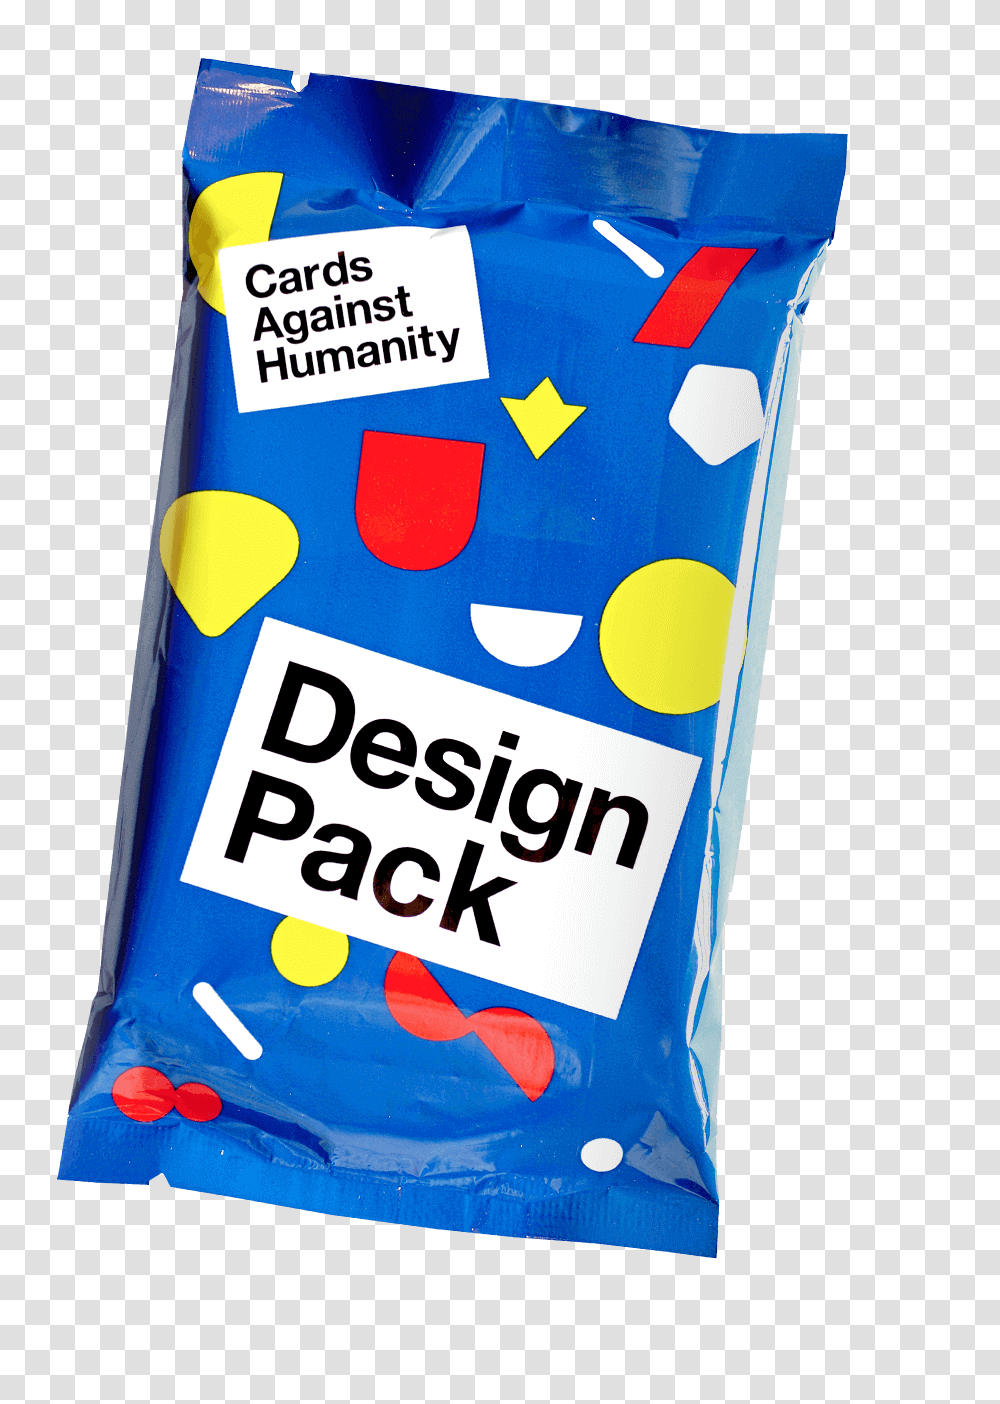 Cards Against Humanity Store, Food, Candy, Cushion, Bottle Transparent Png